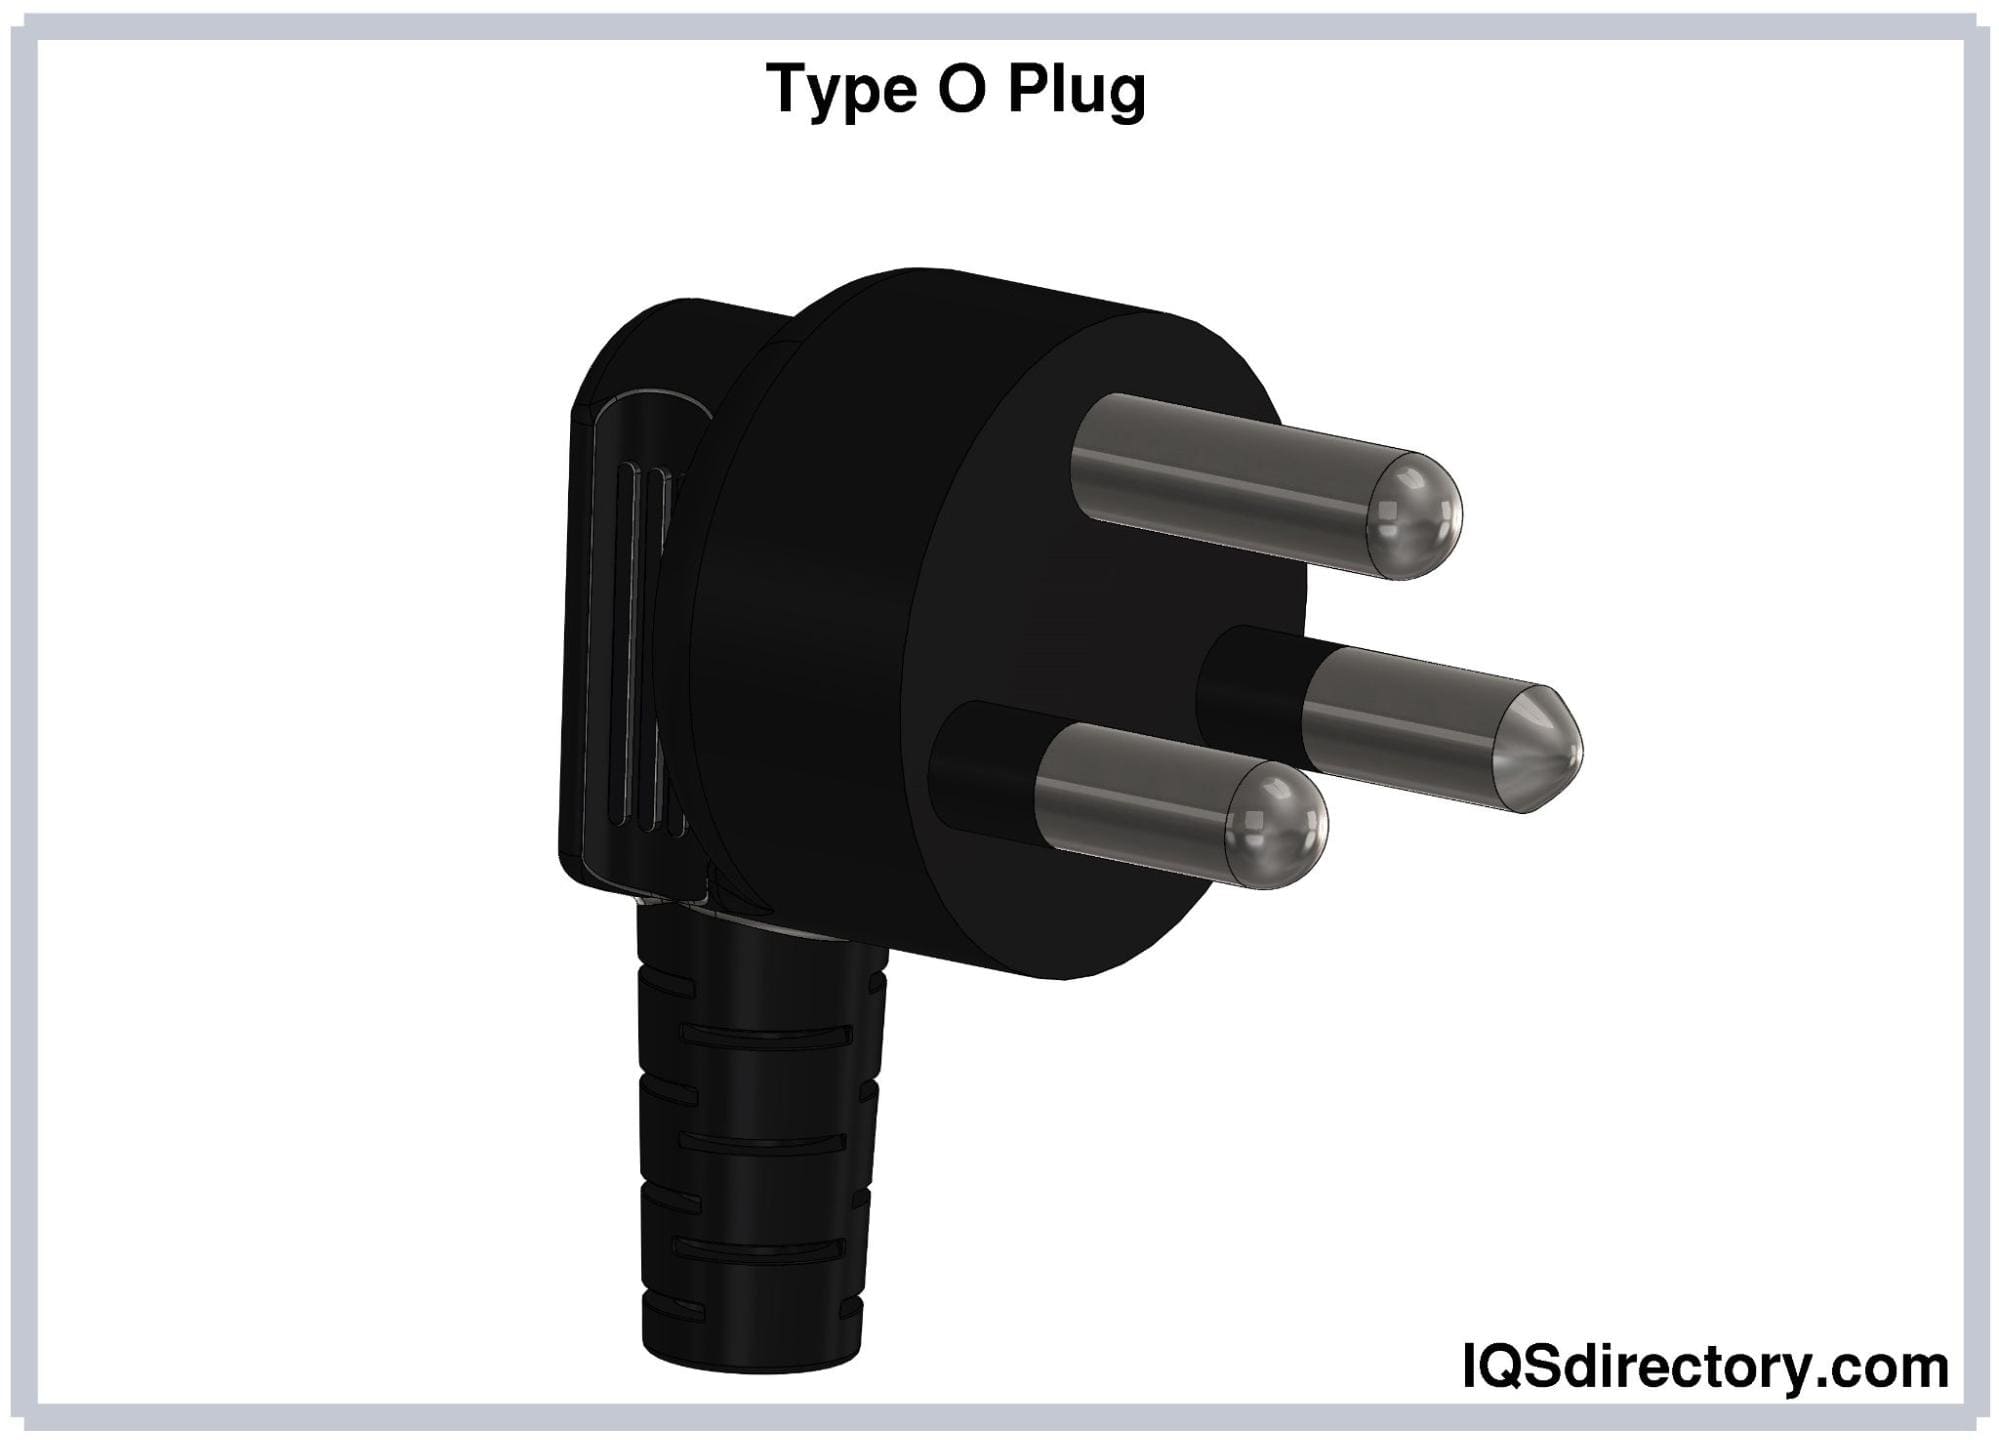 Ac Power Plugs And Sockets: Most Up-to-Date Encyclopedia, News & Reviews